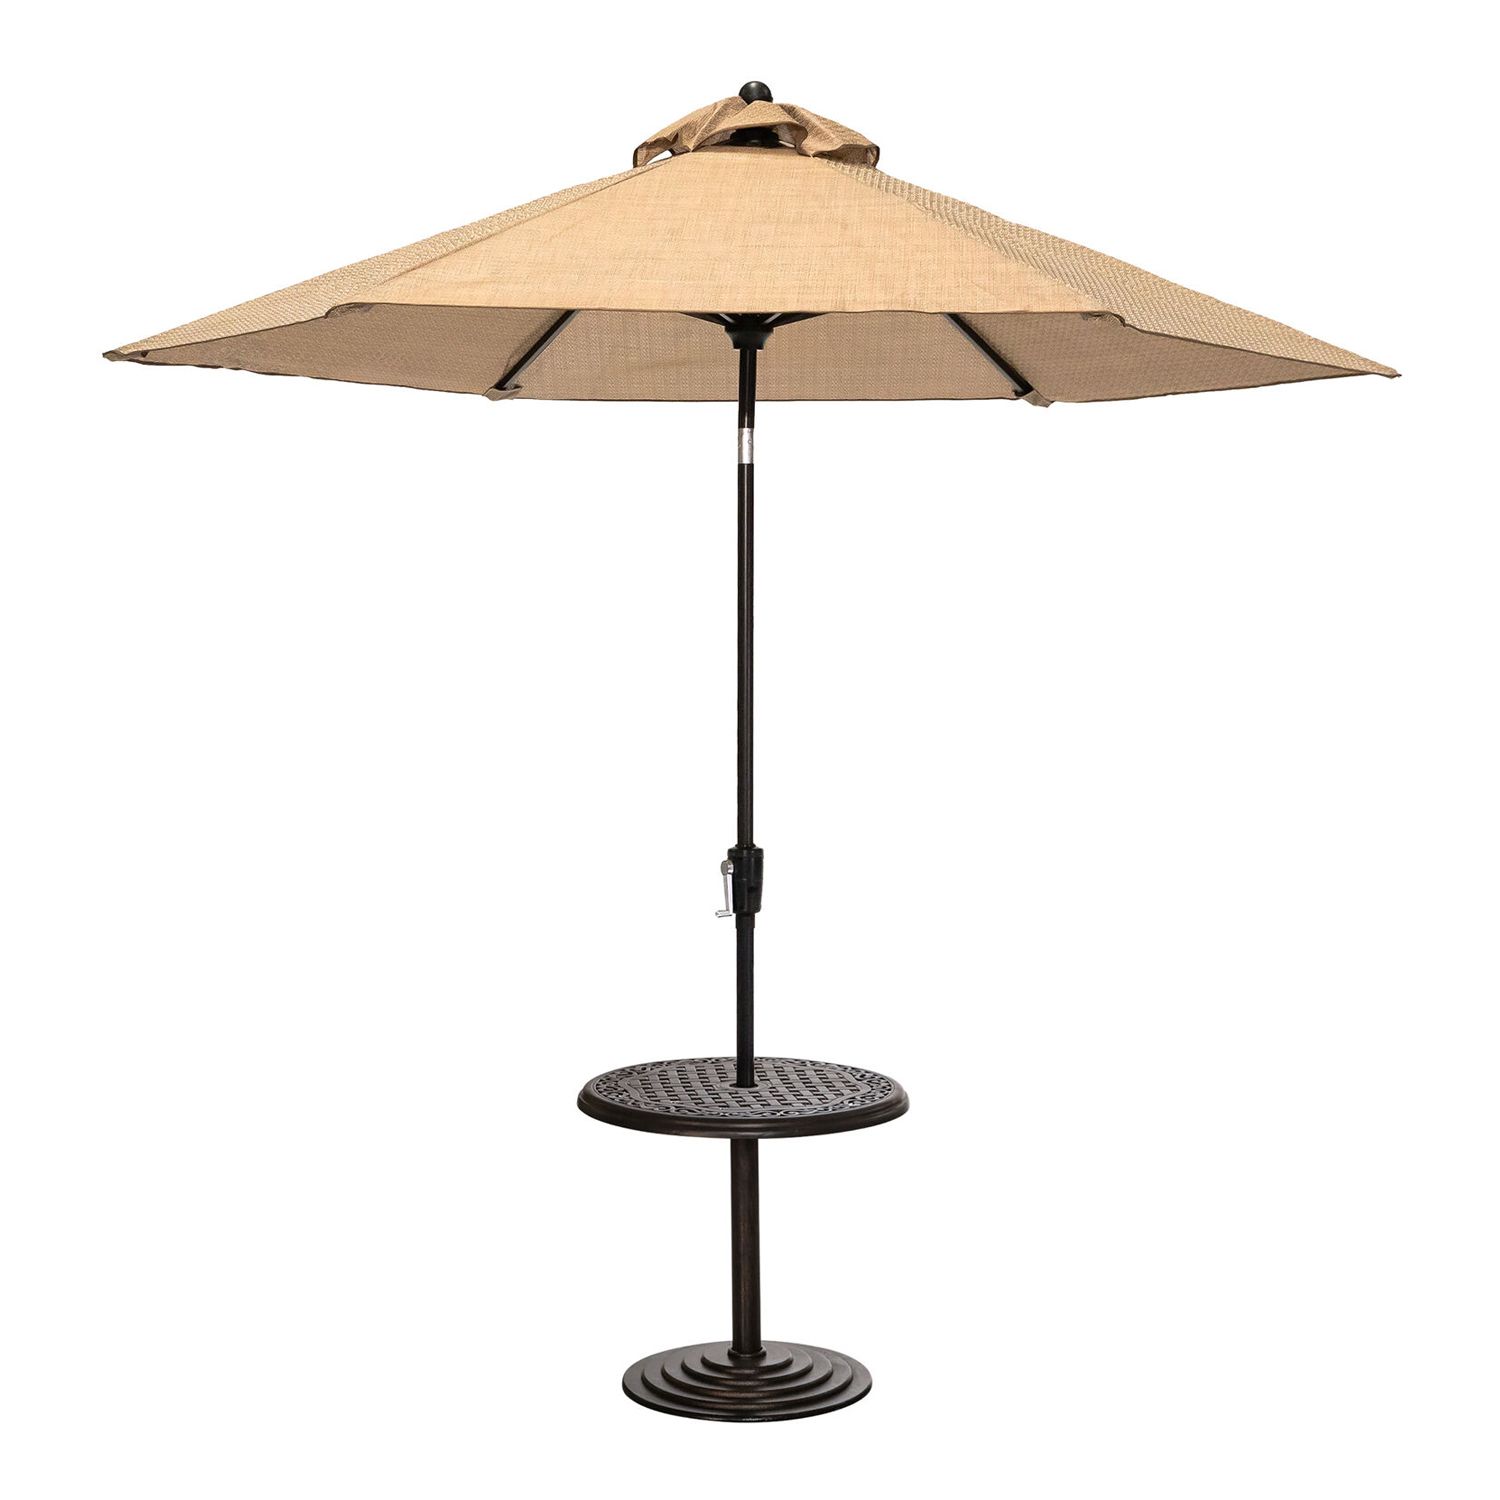 Image for Hanover Accessories Faux Basketweave Round Umbrella End Table at Kohl's.